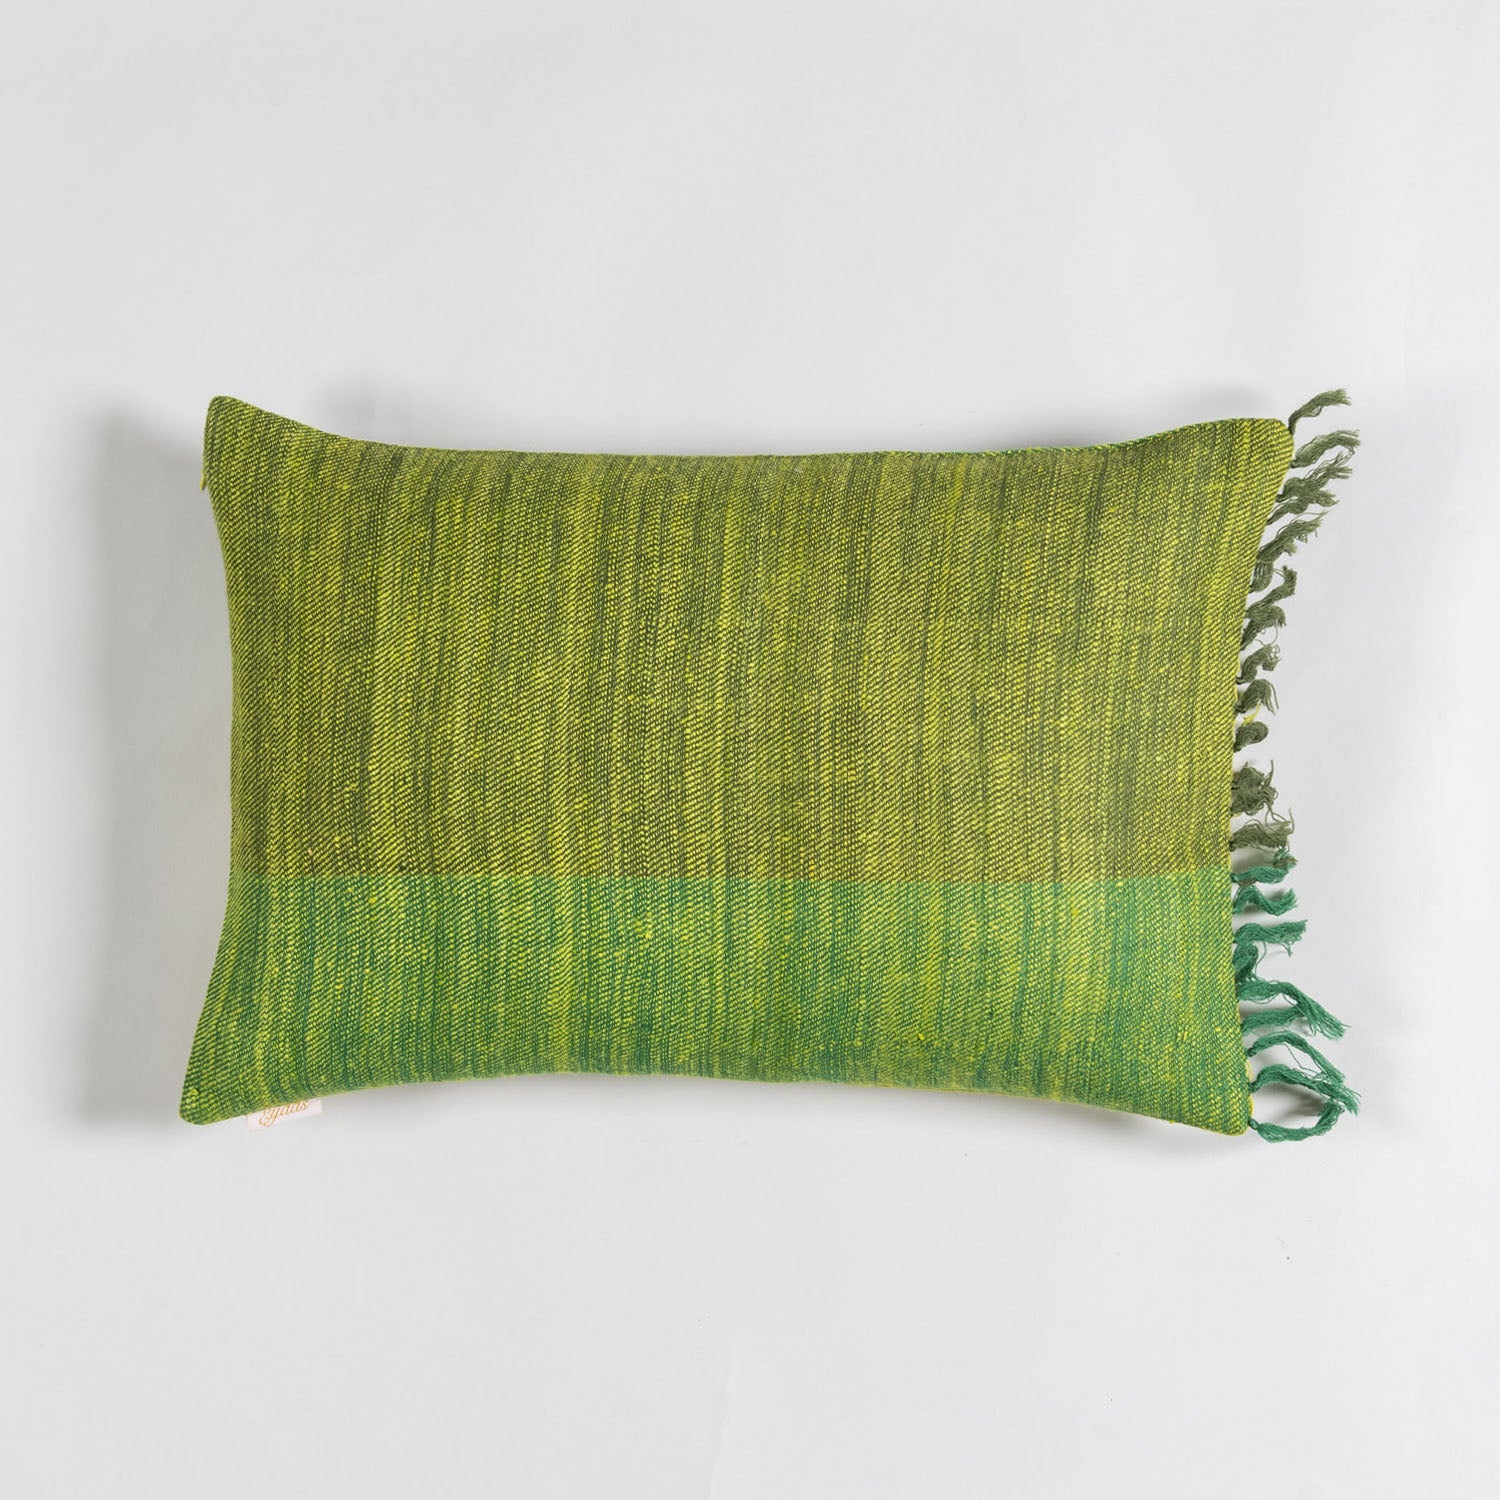 Handwoven Upcycled Lime Green Wool & Oak Silk Cushion Cover - 12x18